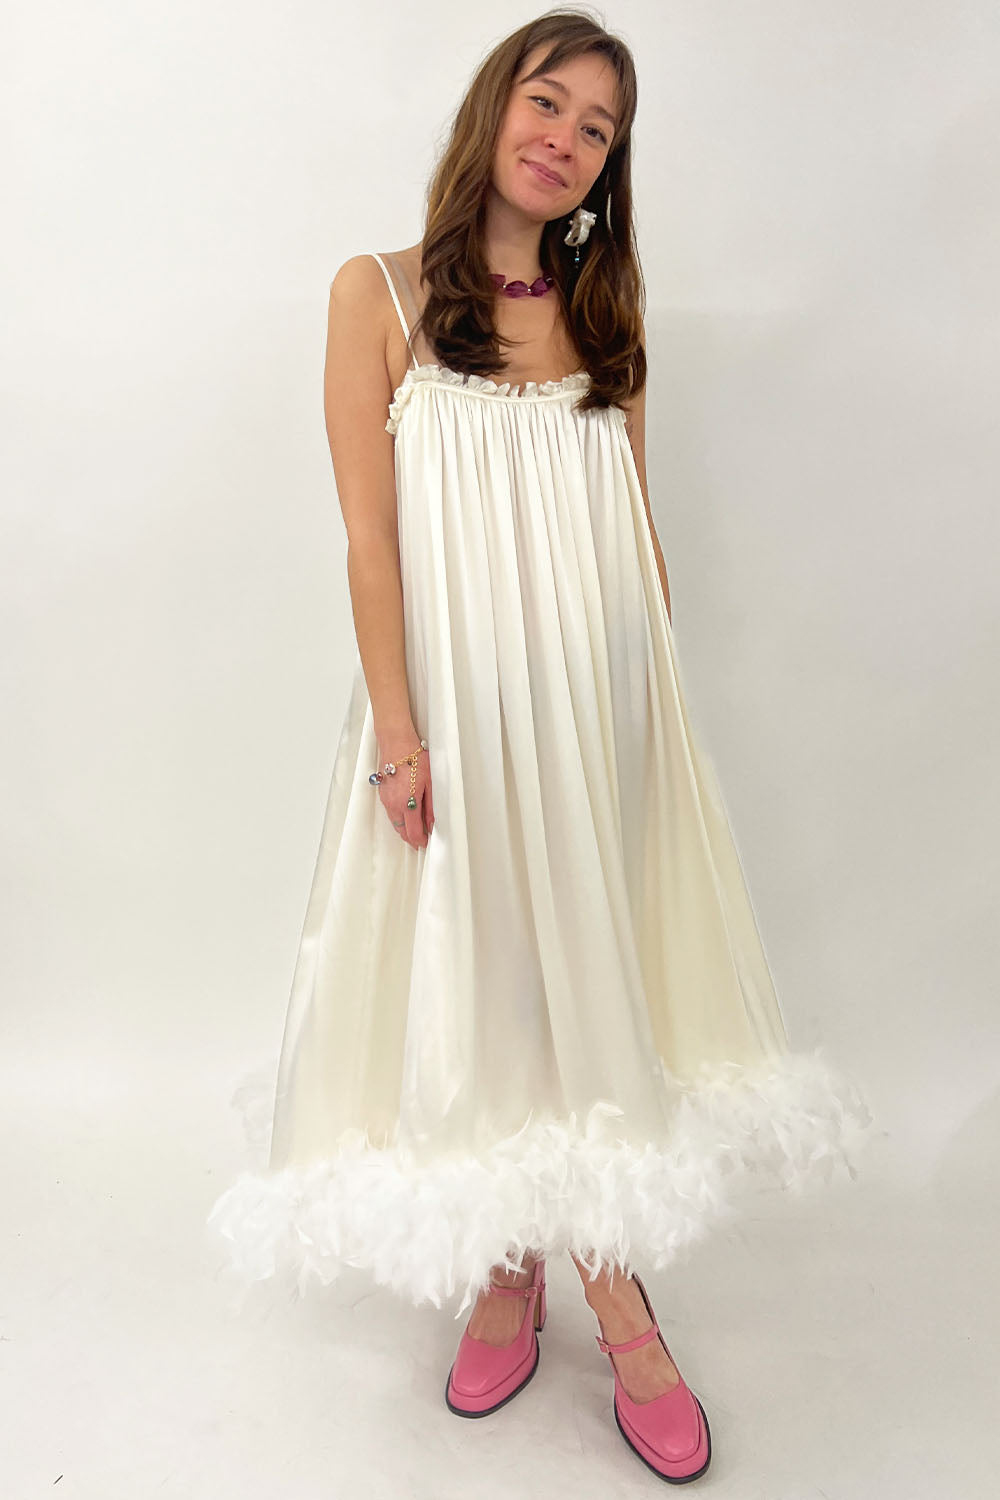 Dauphinette - Wellness Gown: Ivory